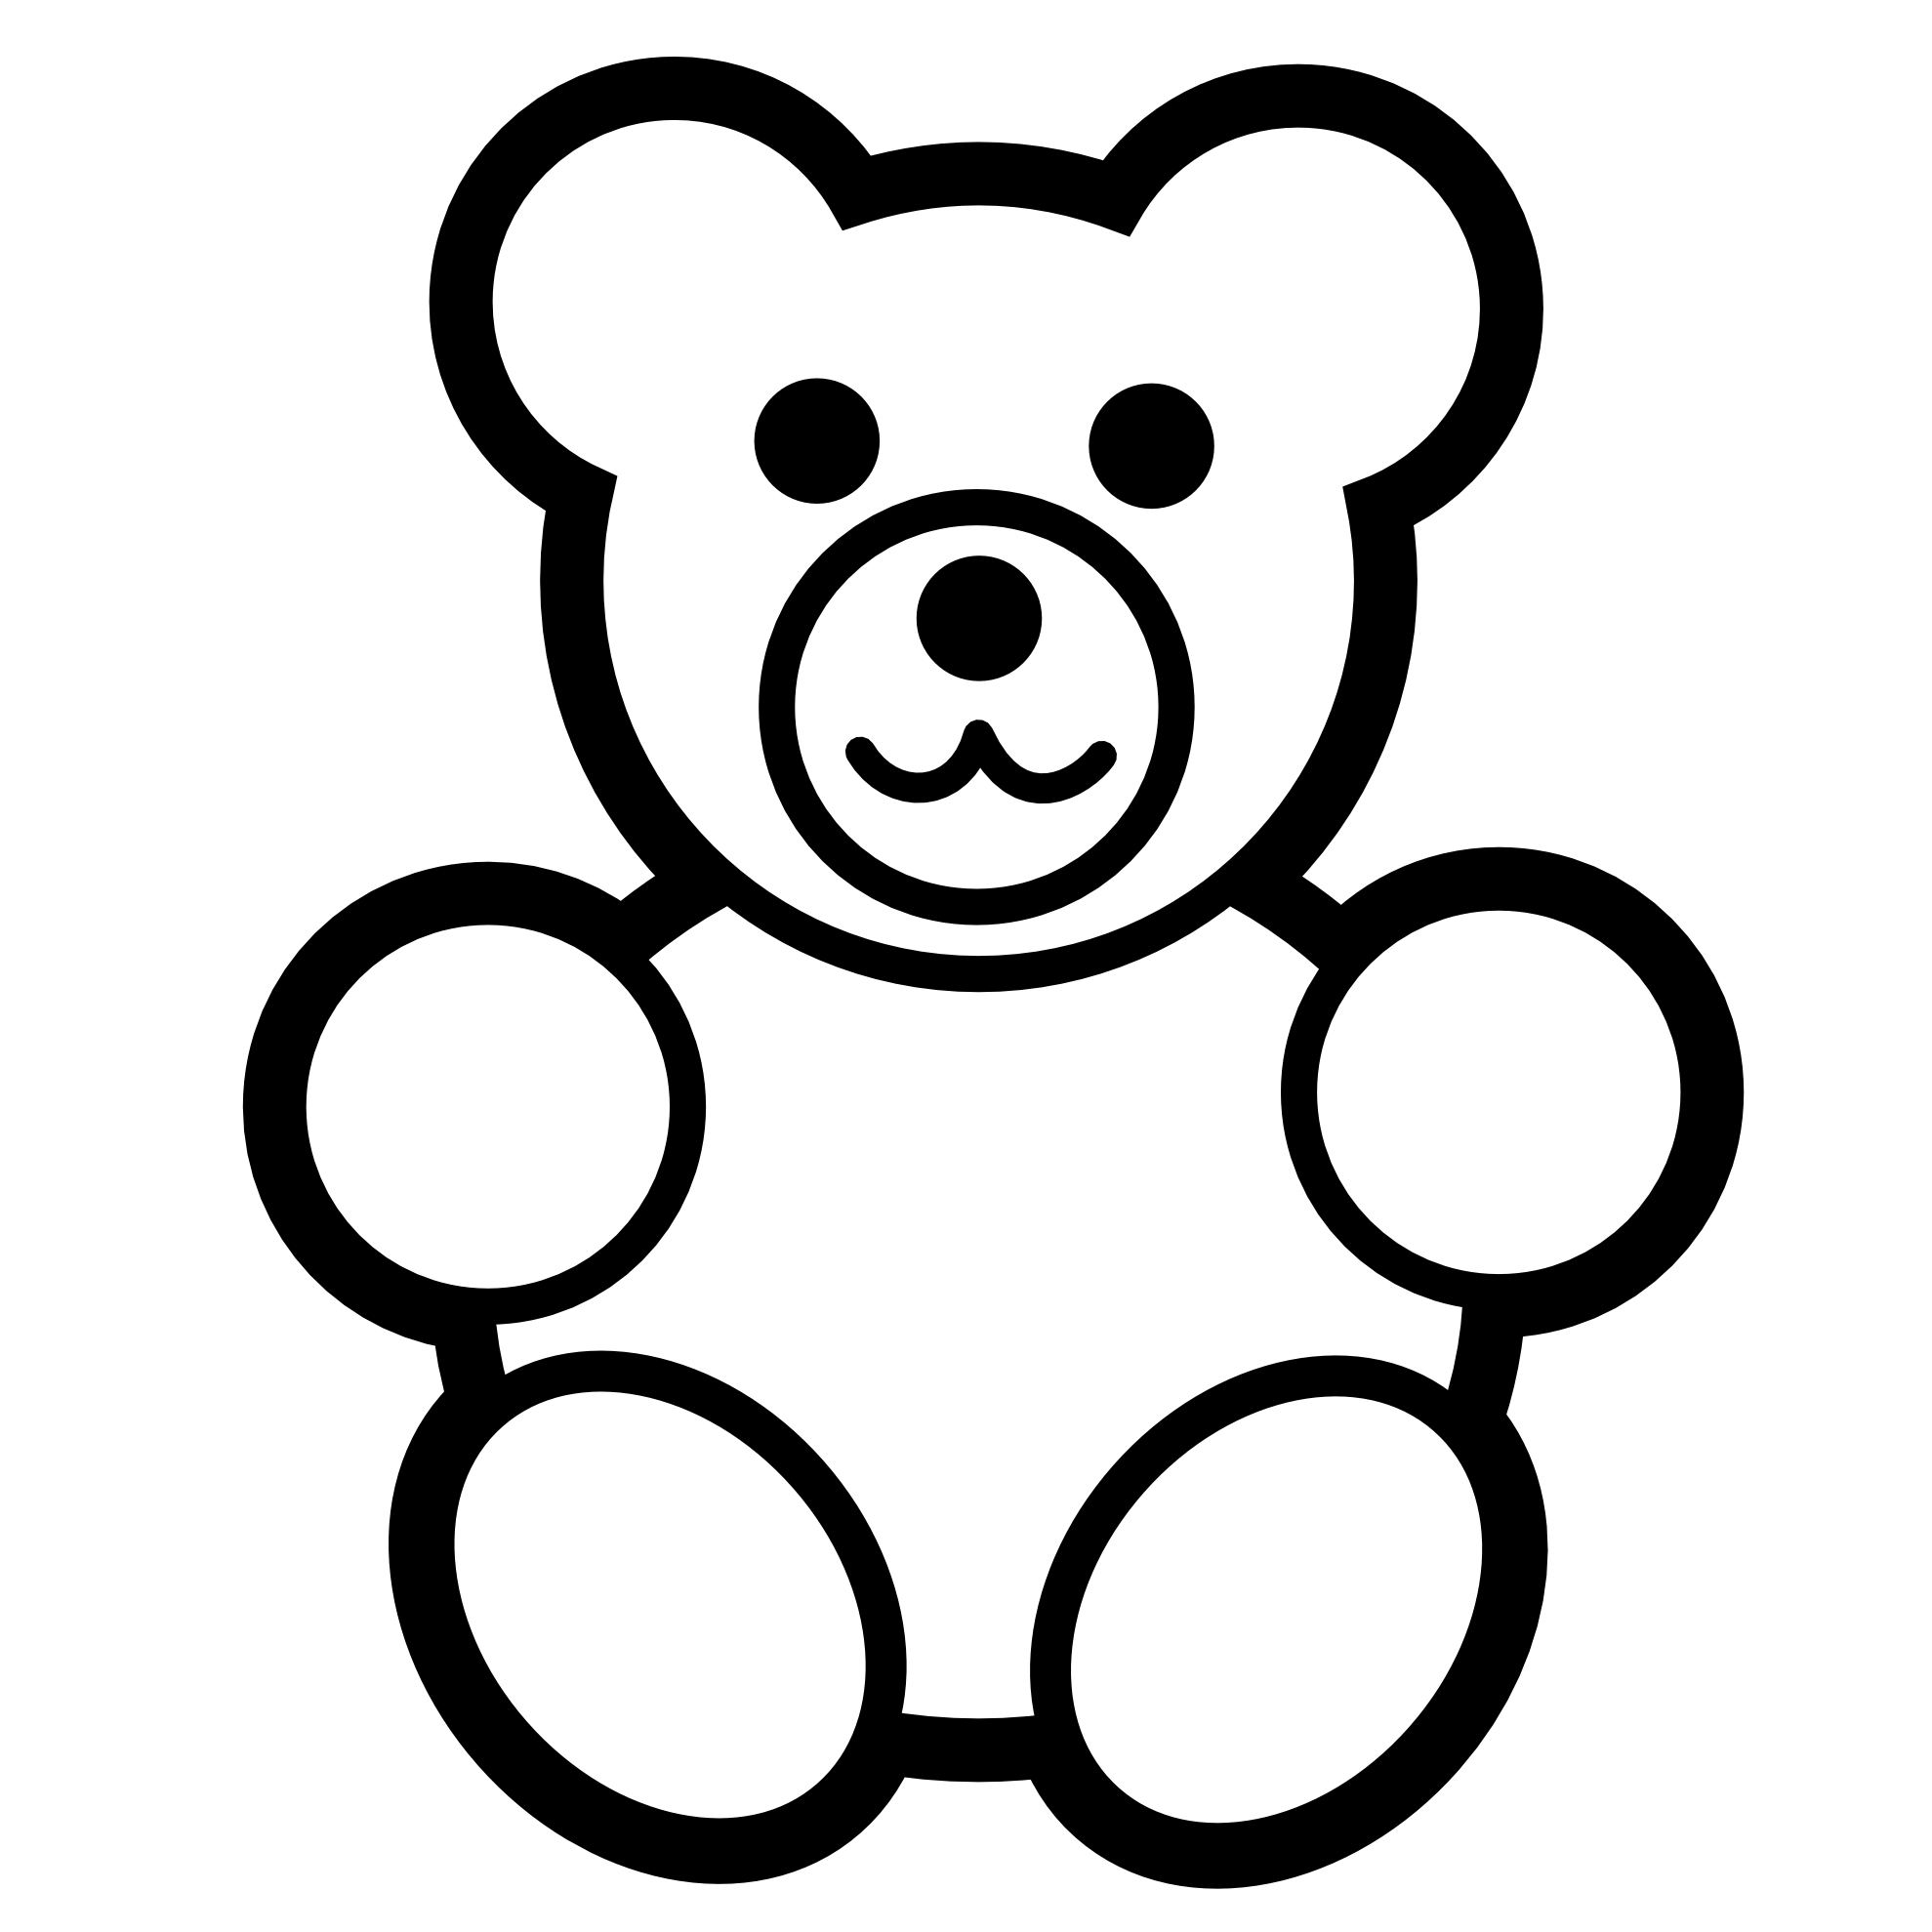 Free Teddy Bear Outline, Download Free Teddy Bear Outline png images